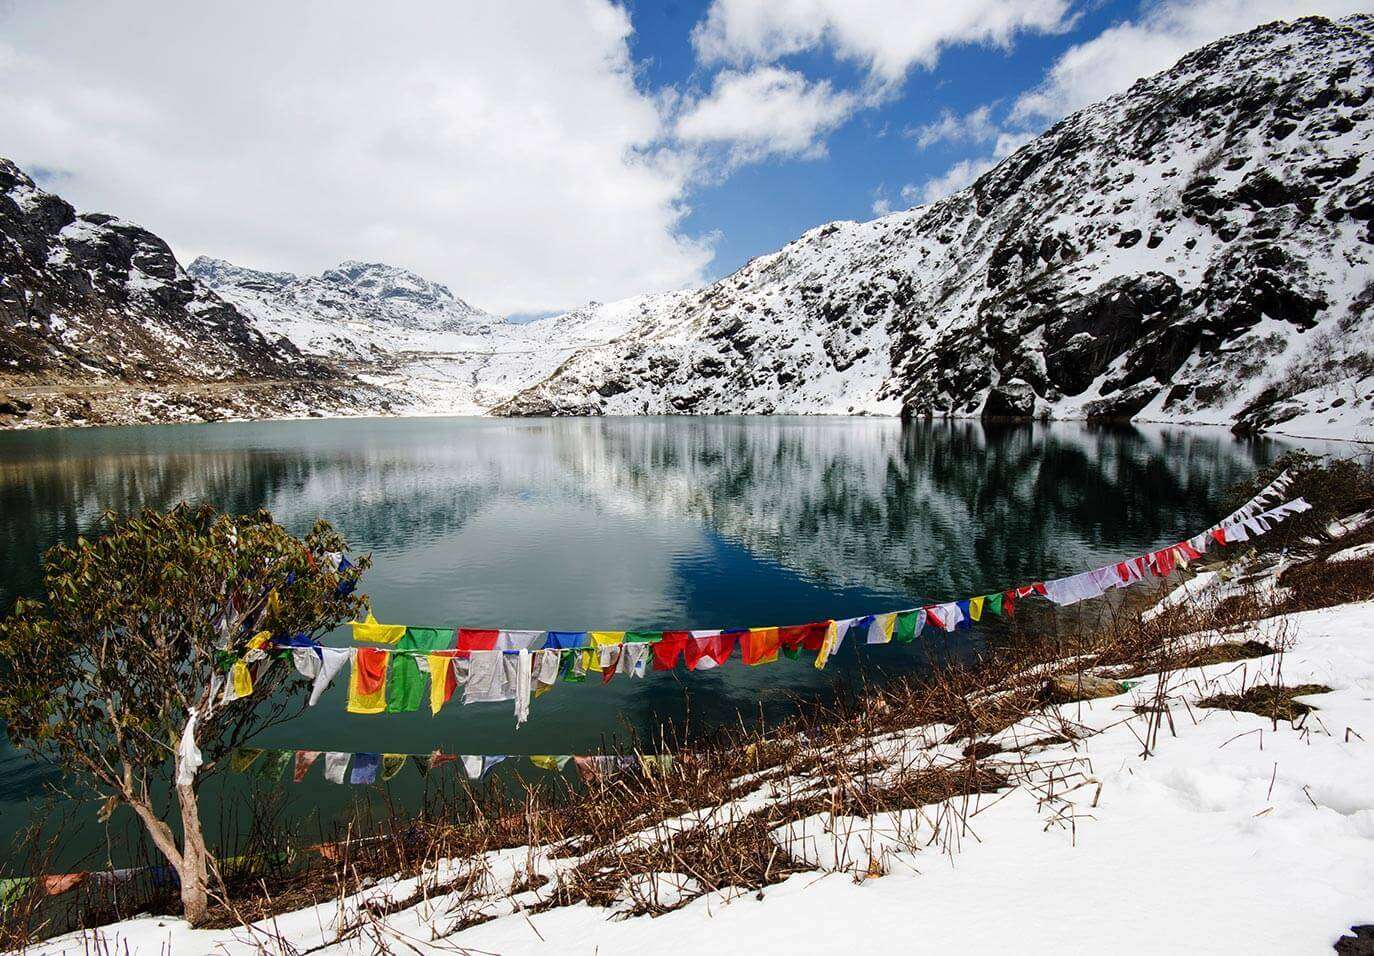 sikkim tour package for 5 days couple